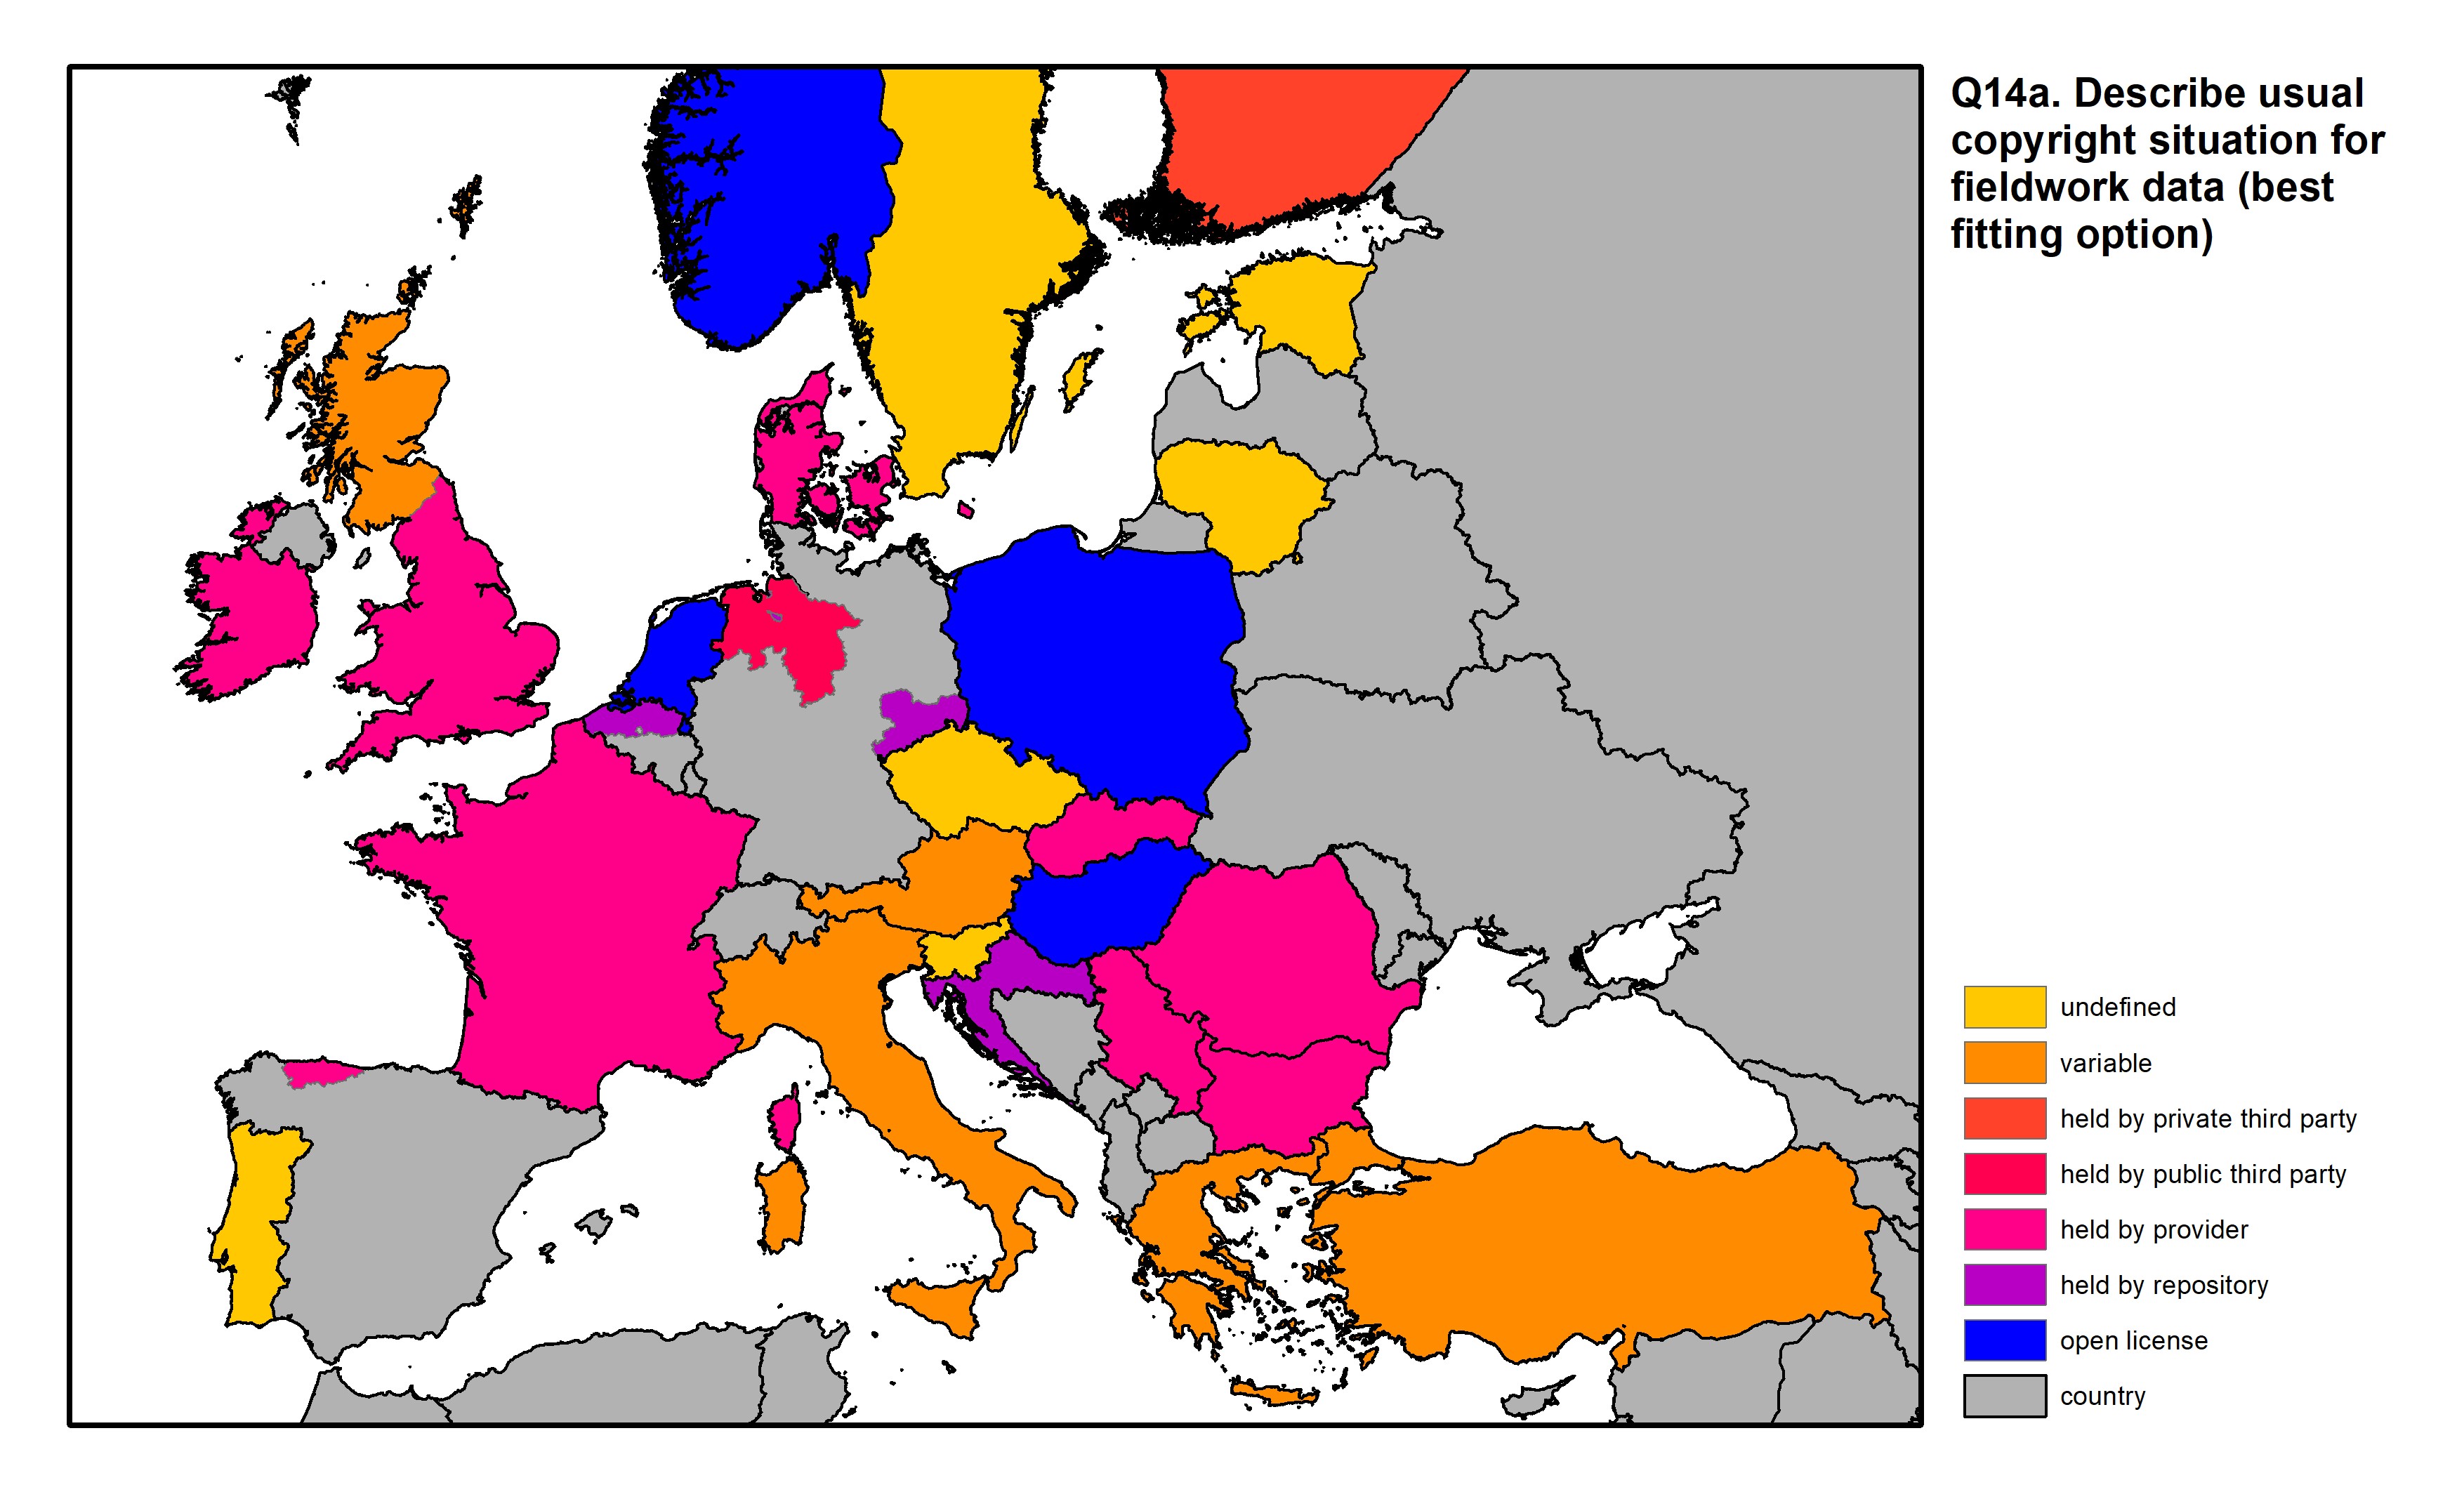 Figure 46: a map of Europe showing countries and regions in colour based on response rates to the survey question.